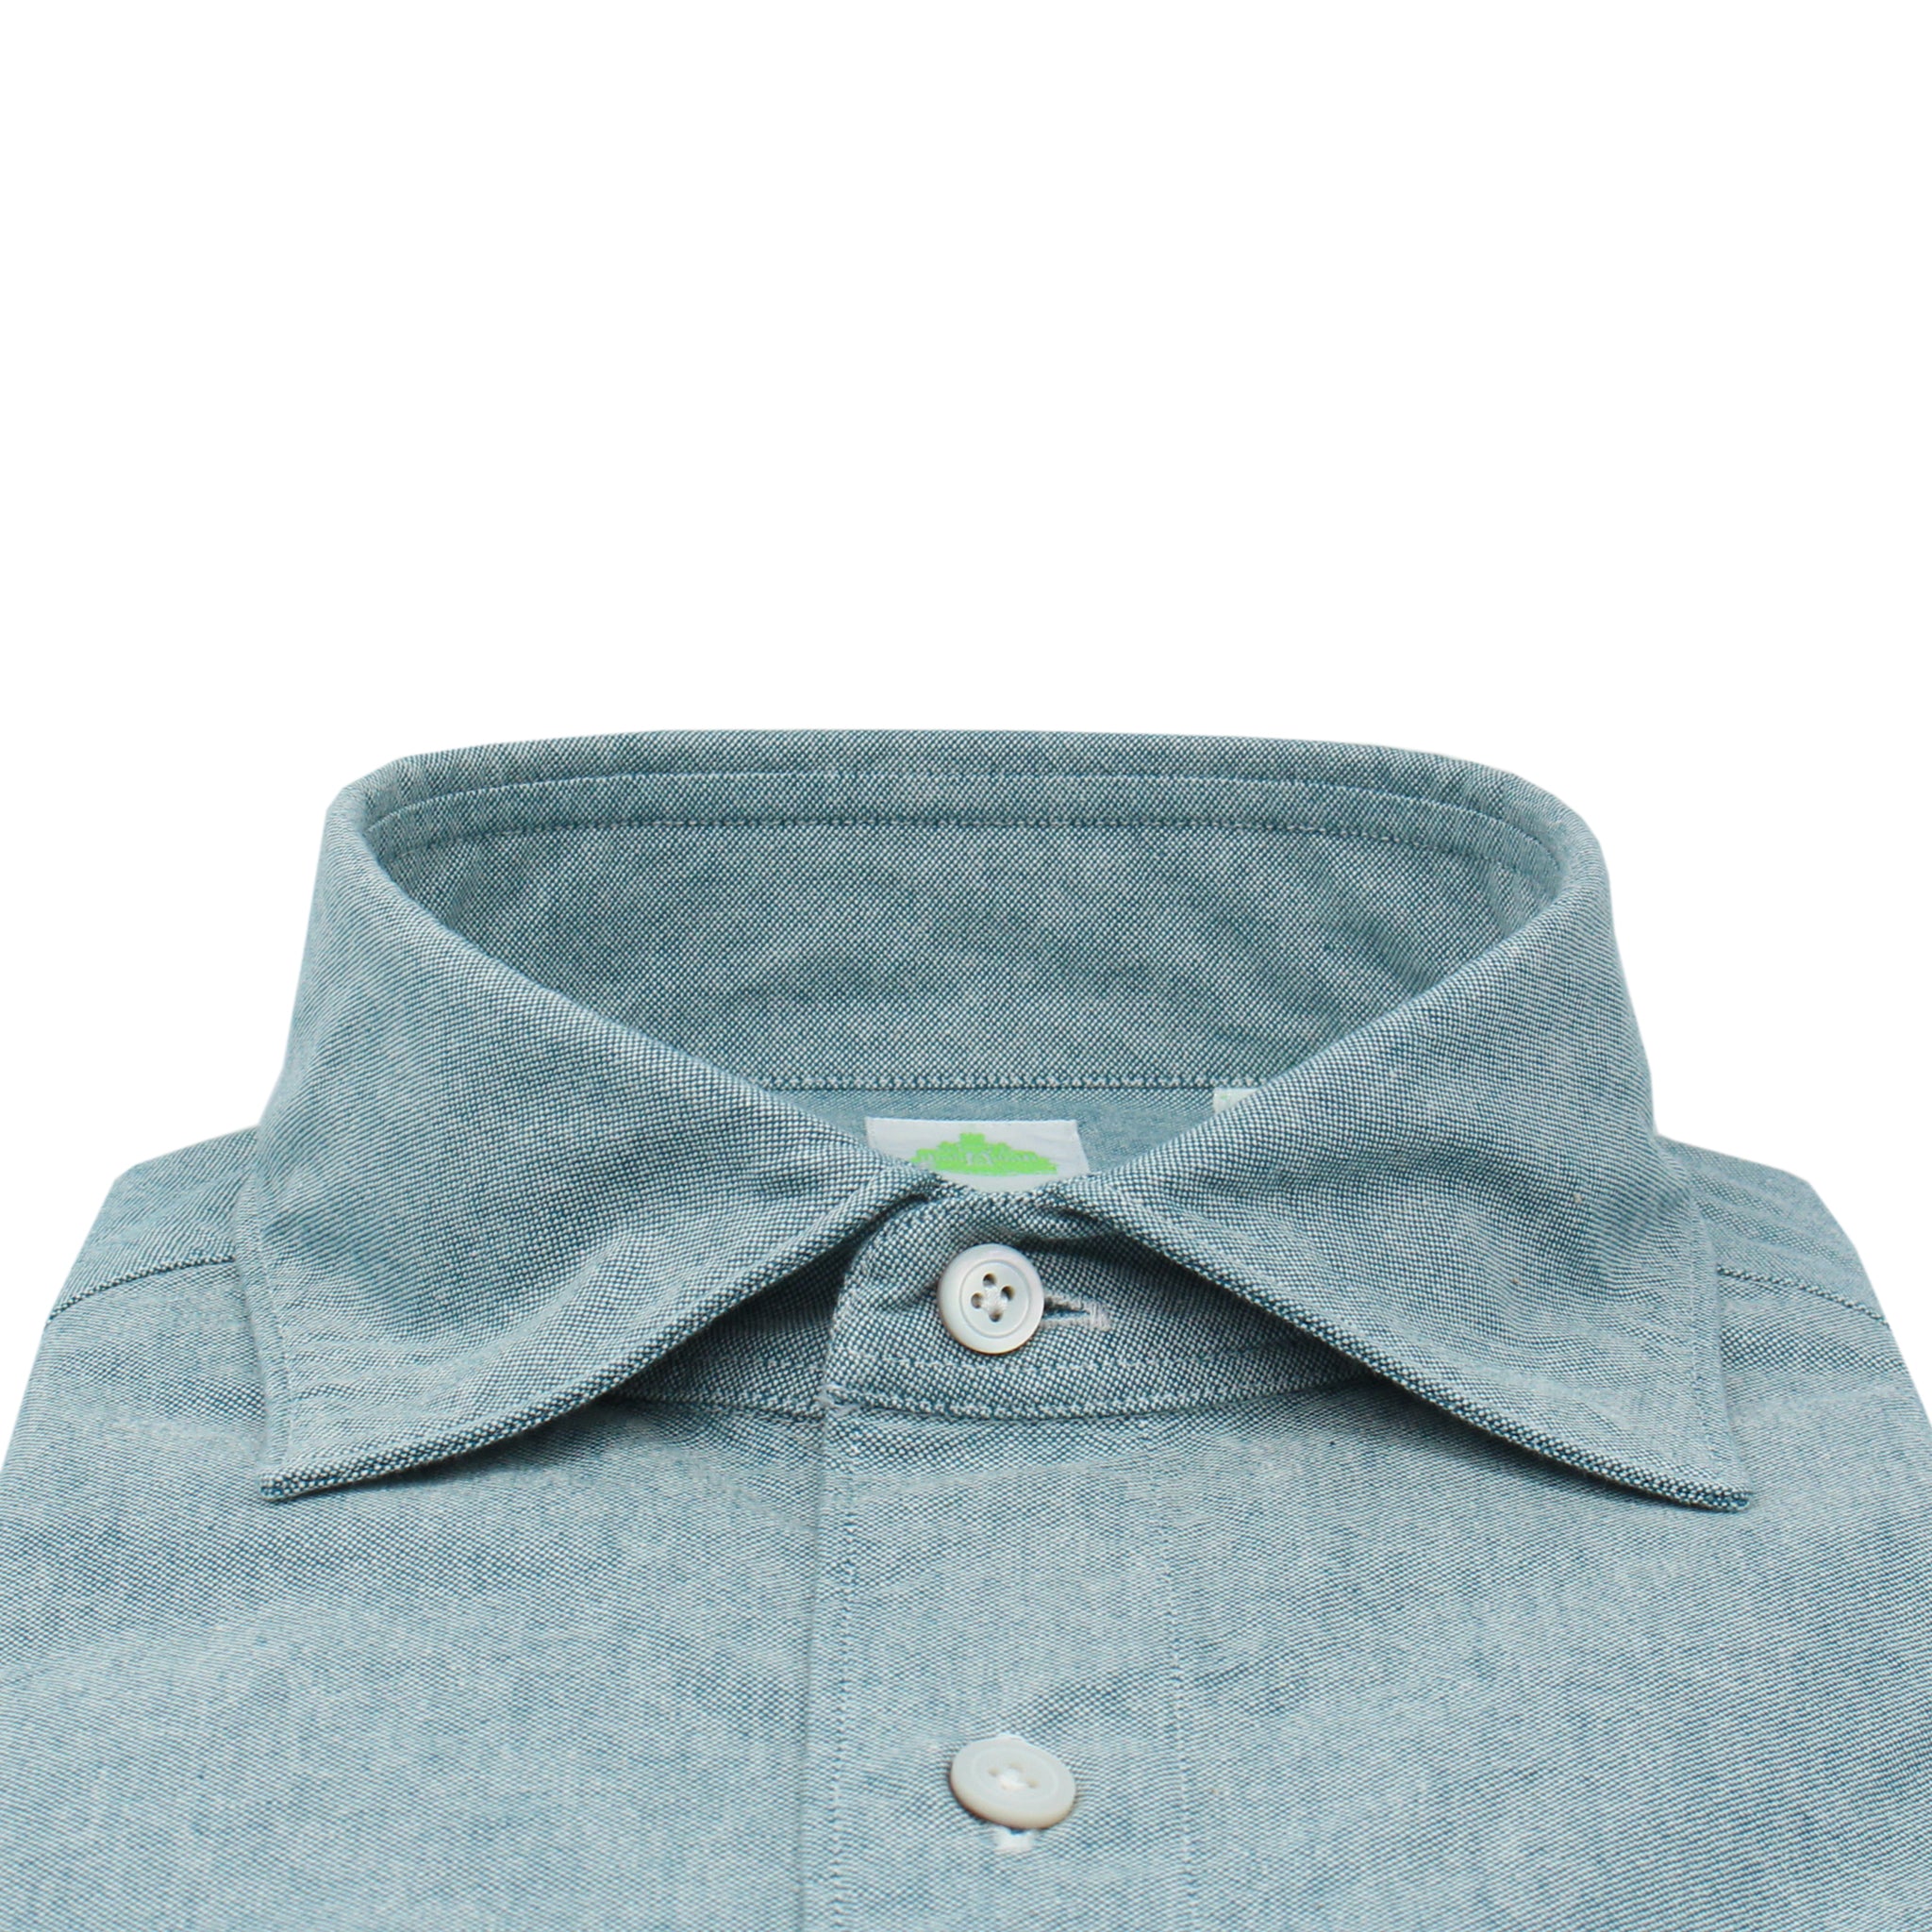 Tokyo slim fit sport shirt in light blue or red cotton